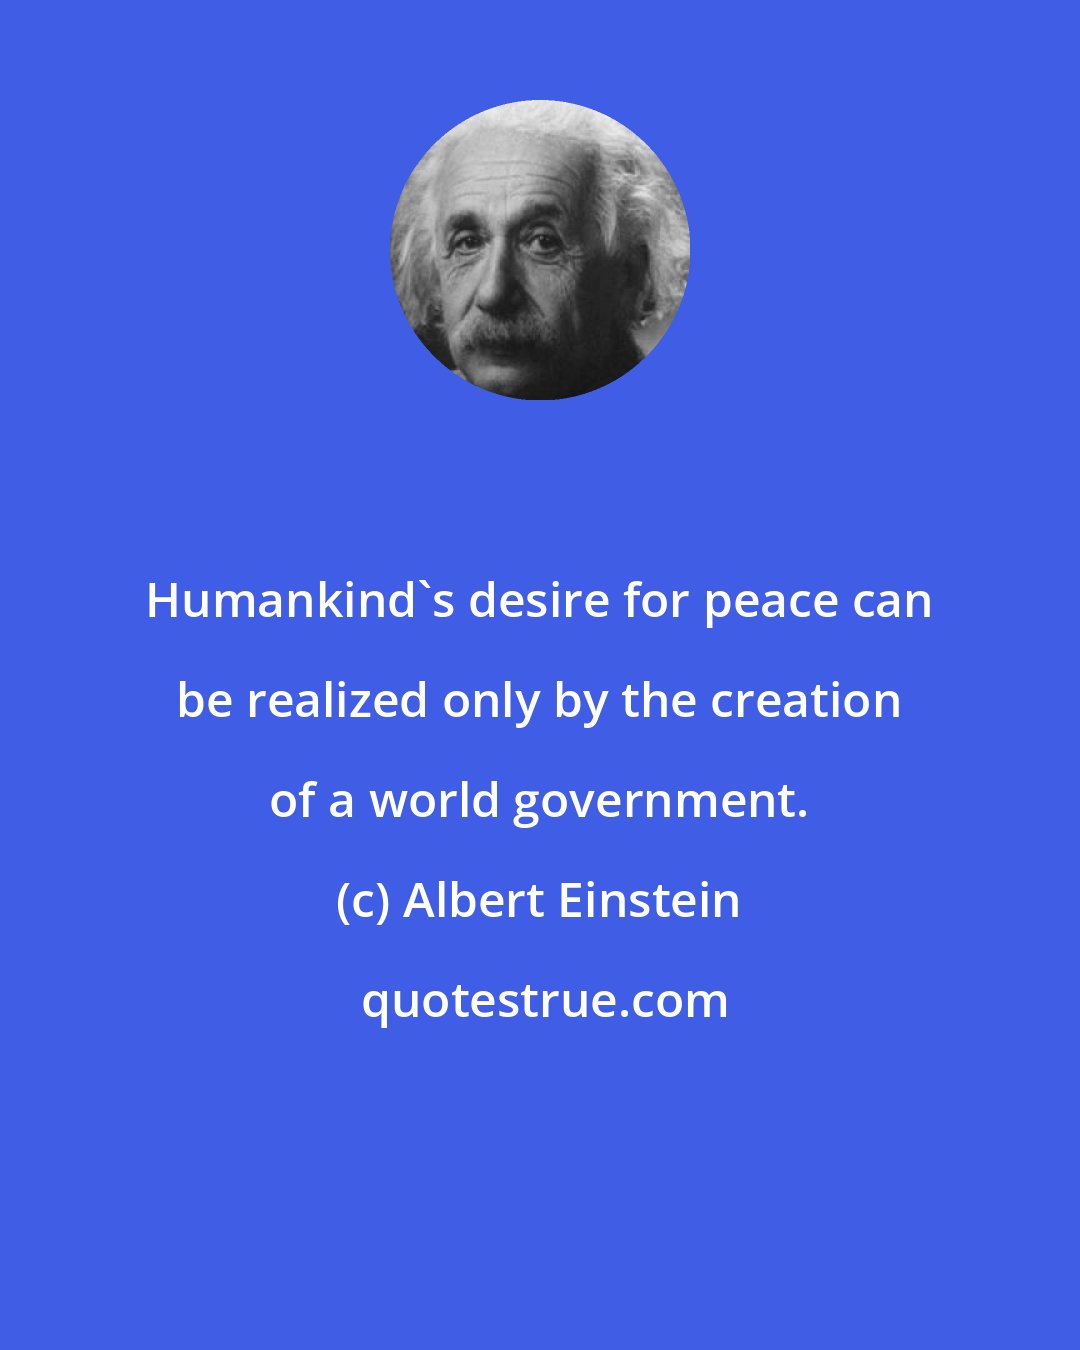 Albert Einstein: Humankind's desire for peace can be realized only by the creation of a world government.